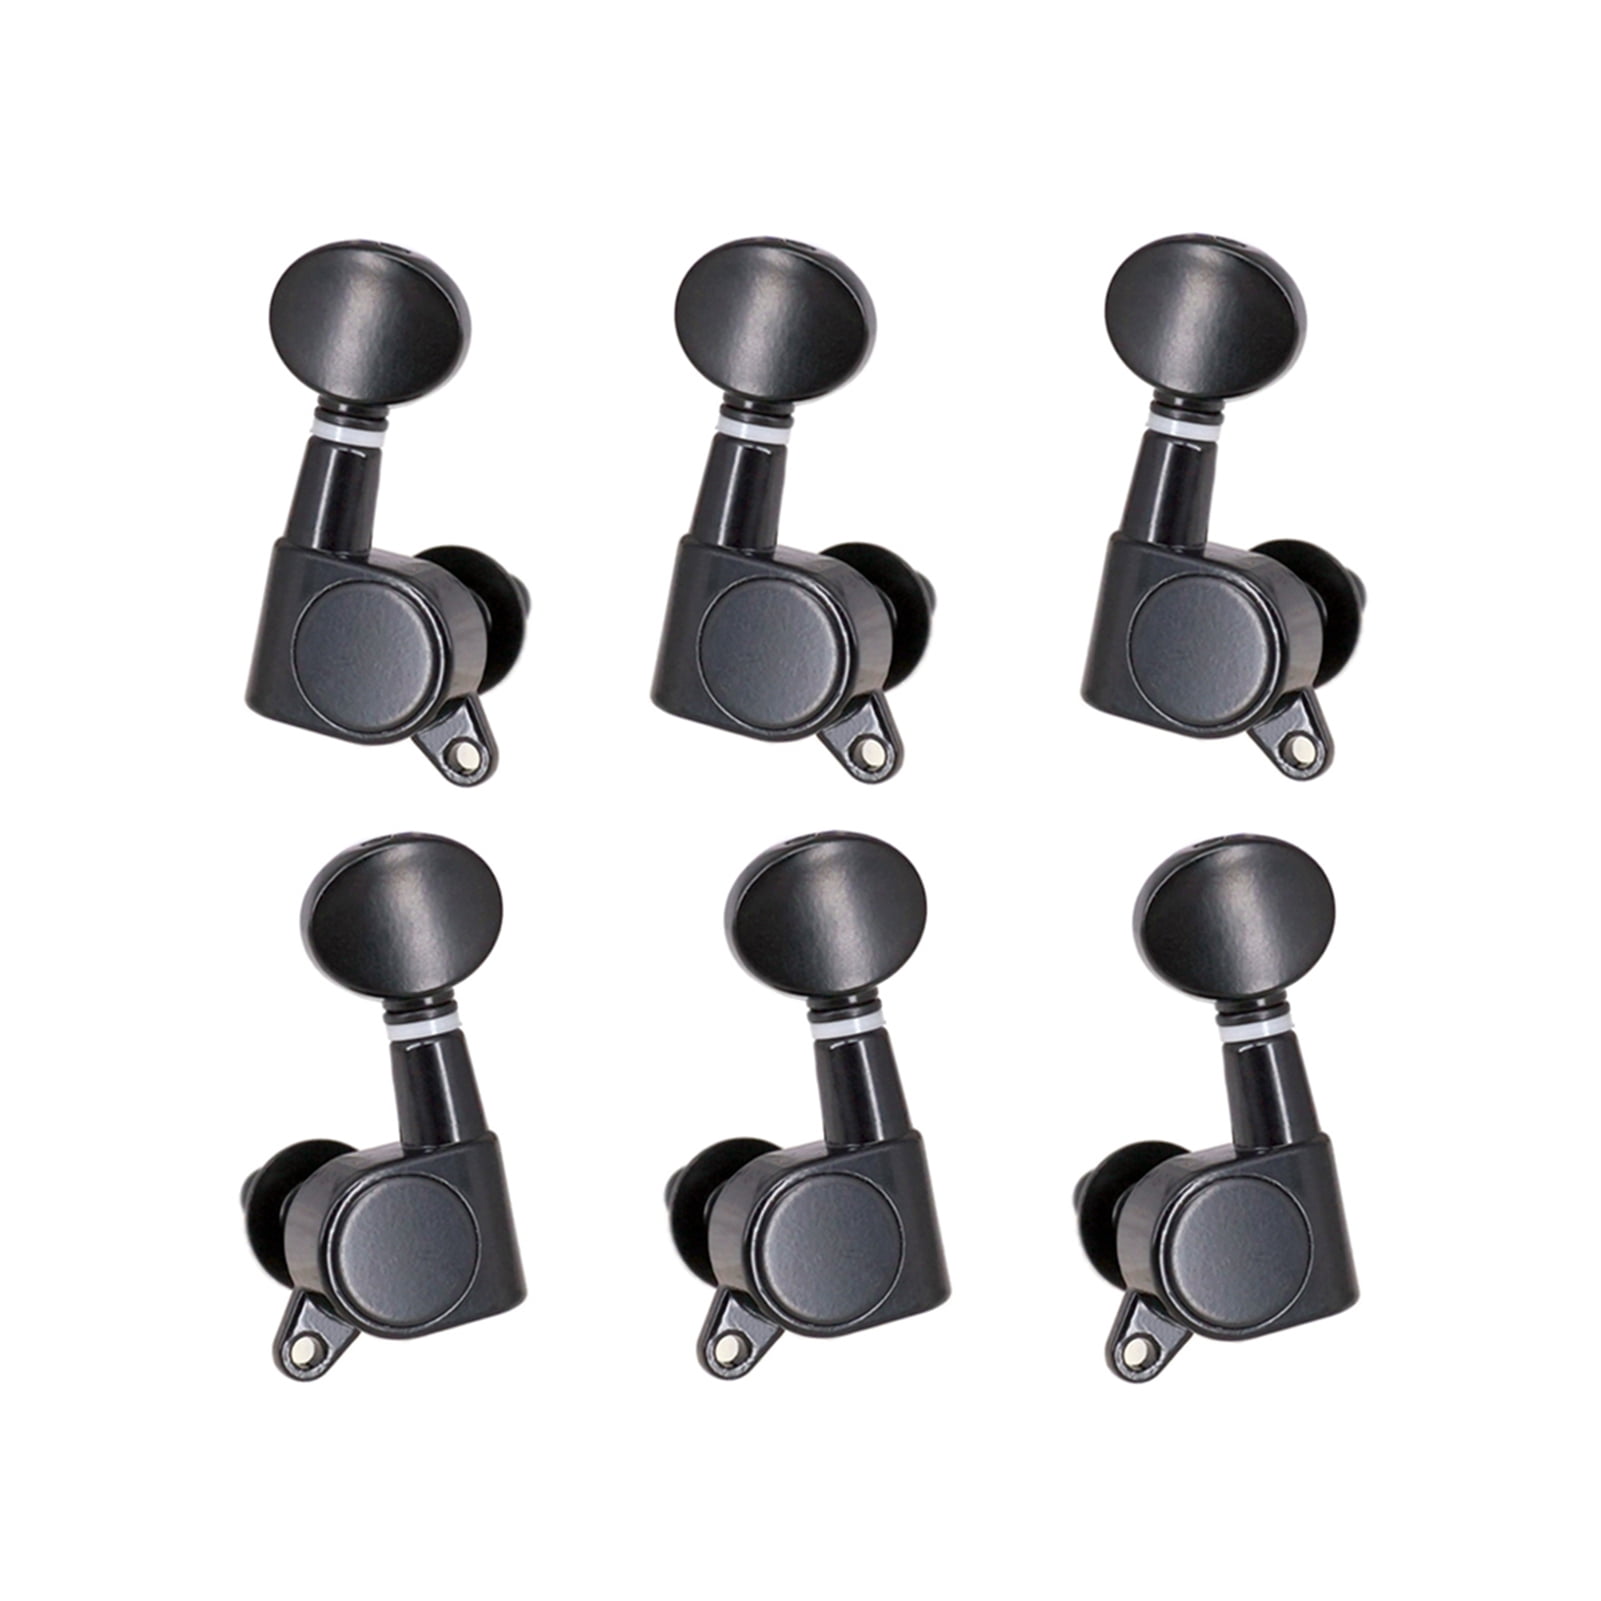 Guitar Tuning Peg 6 Pcs Tuning Pegs Locking Tuners Machine Heads for Acoustic Electric Guitar Accessory Black 6L 